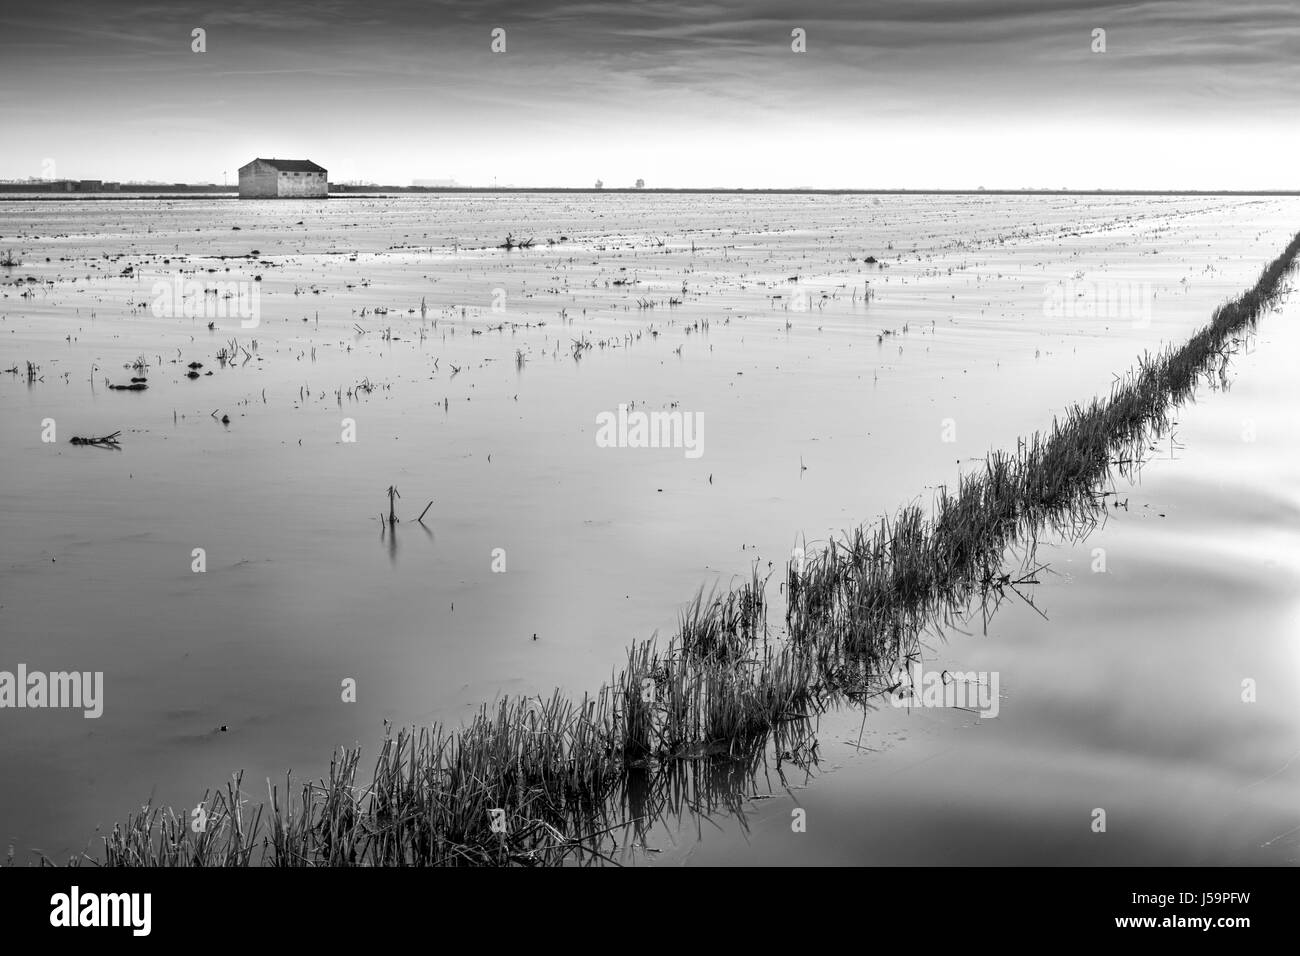 Black and white image of a harvested rice field, Isla Mayor, Seville, Spain Stock Photo